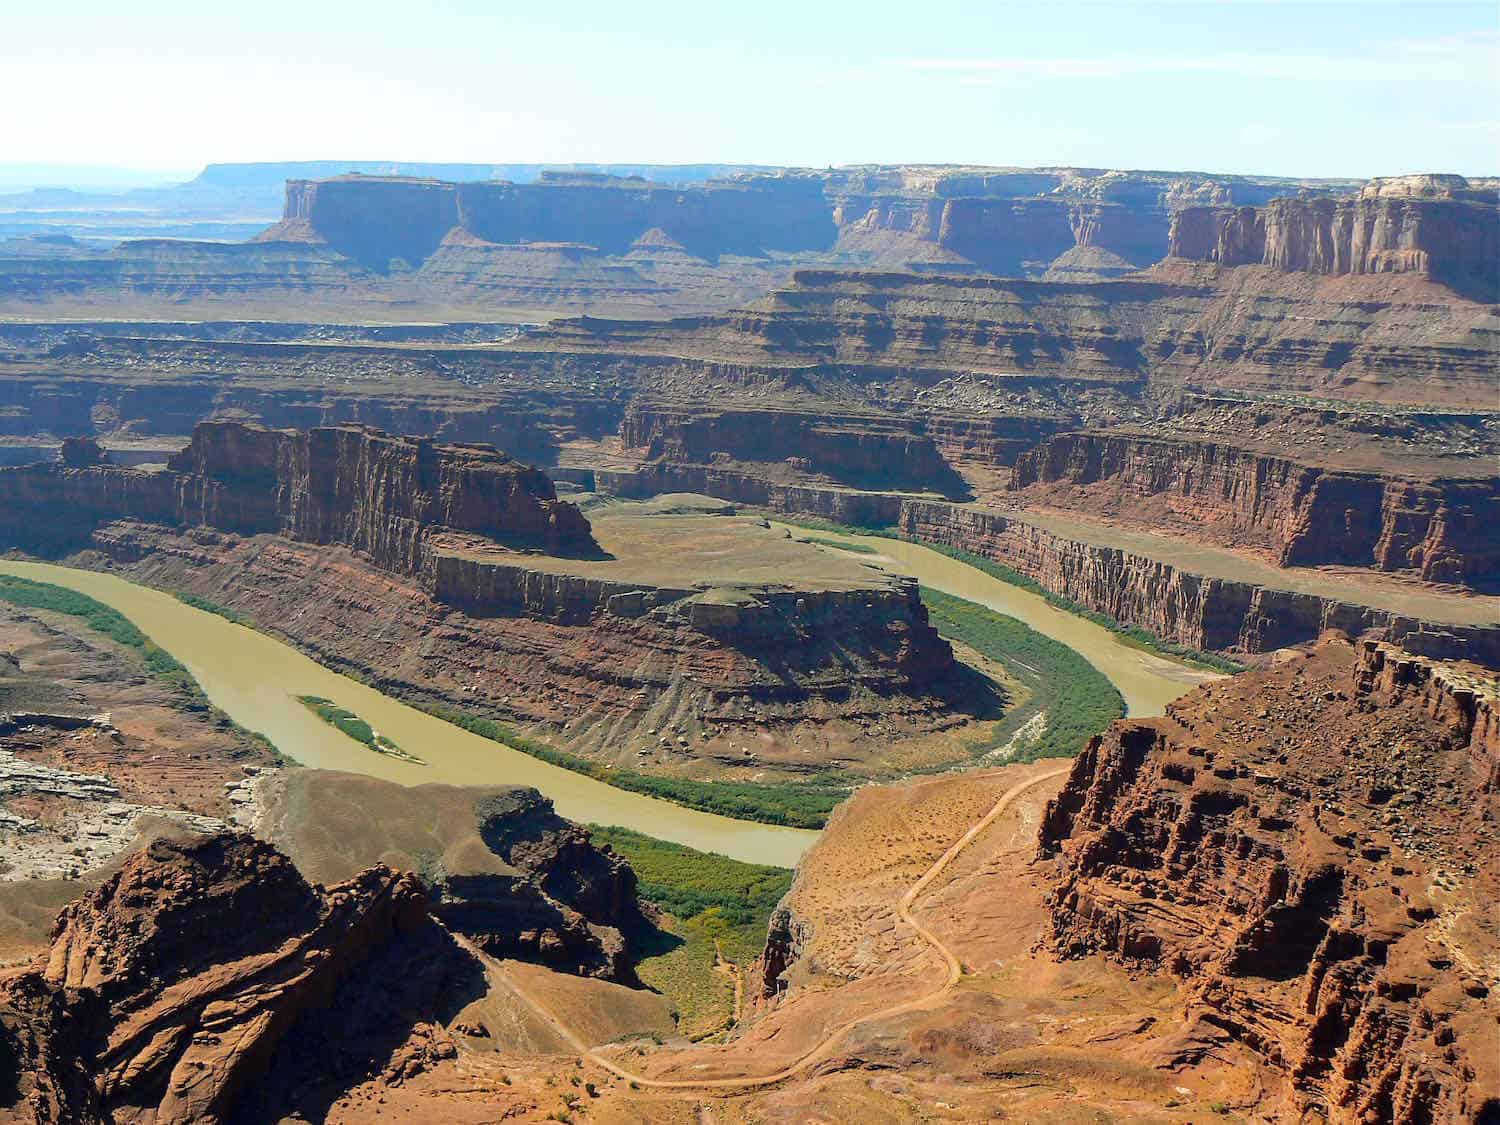 Muddy river winding through a canyon surrounded by cliffs at Dead Horse Point Overlook in Utah.